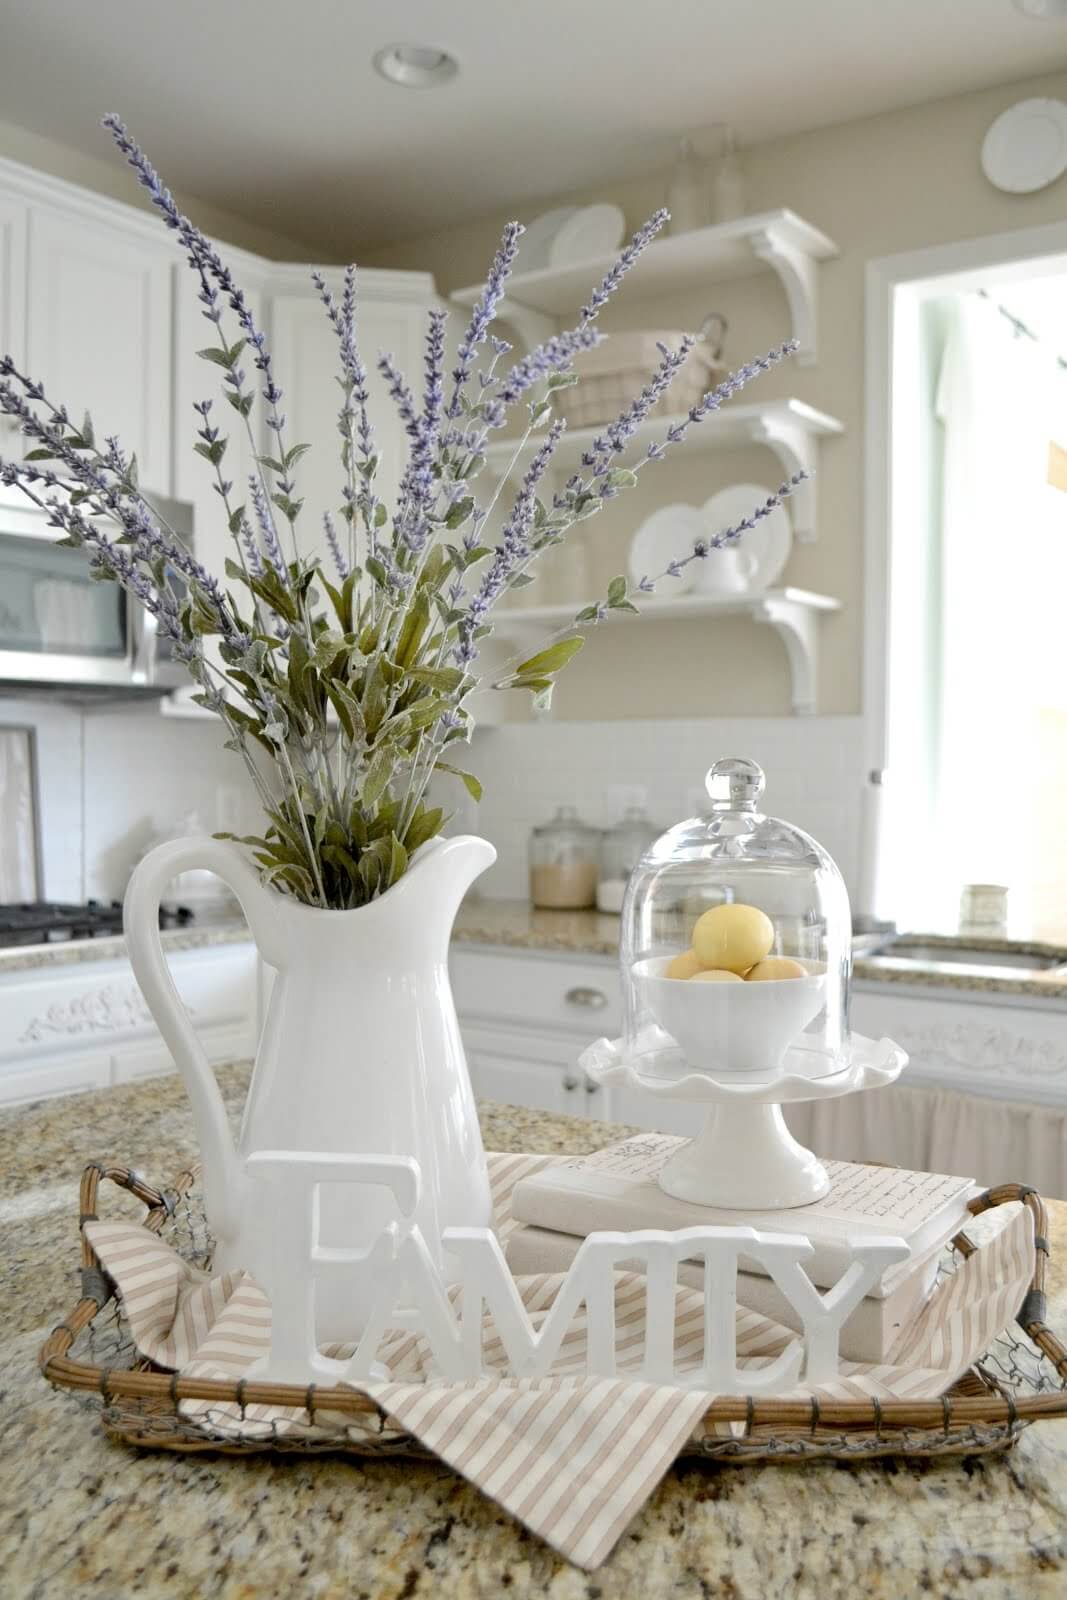 Creamy Whites and Pastels in a Wire Basket